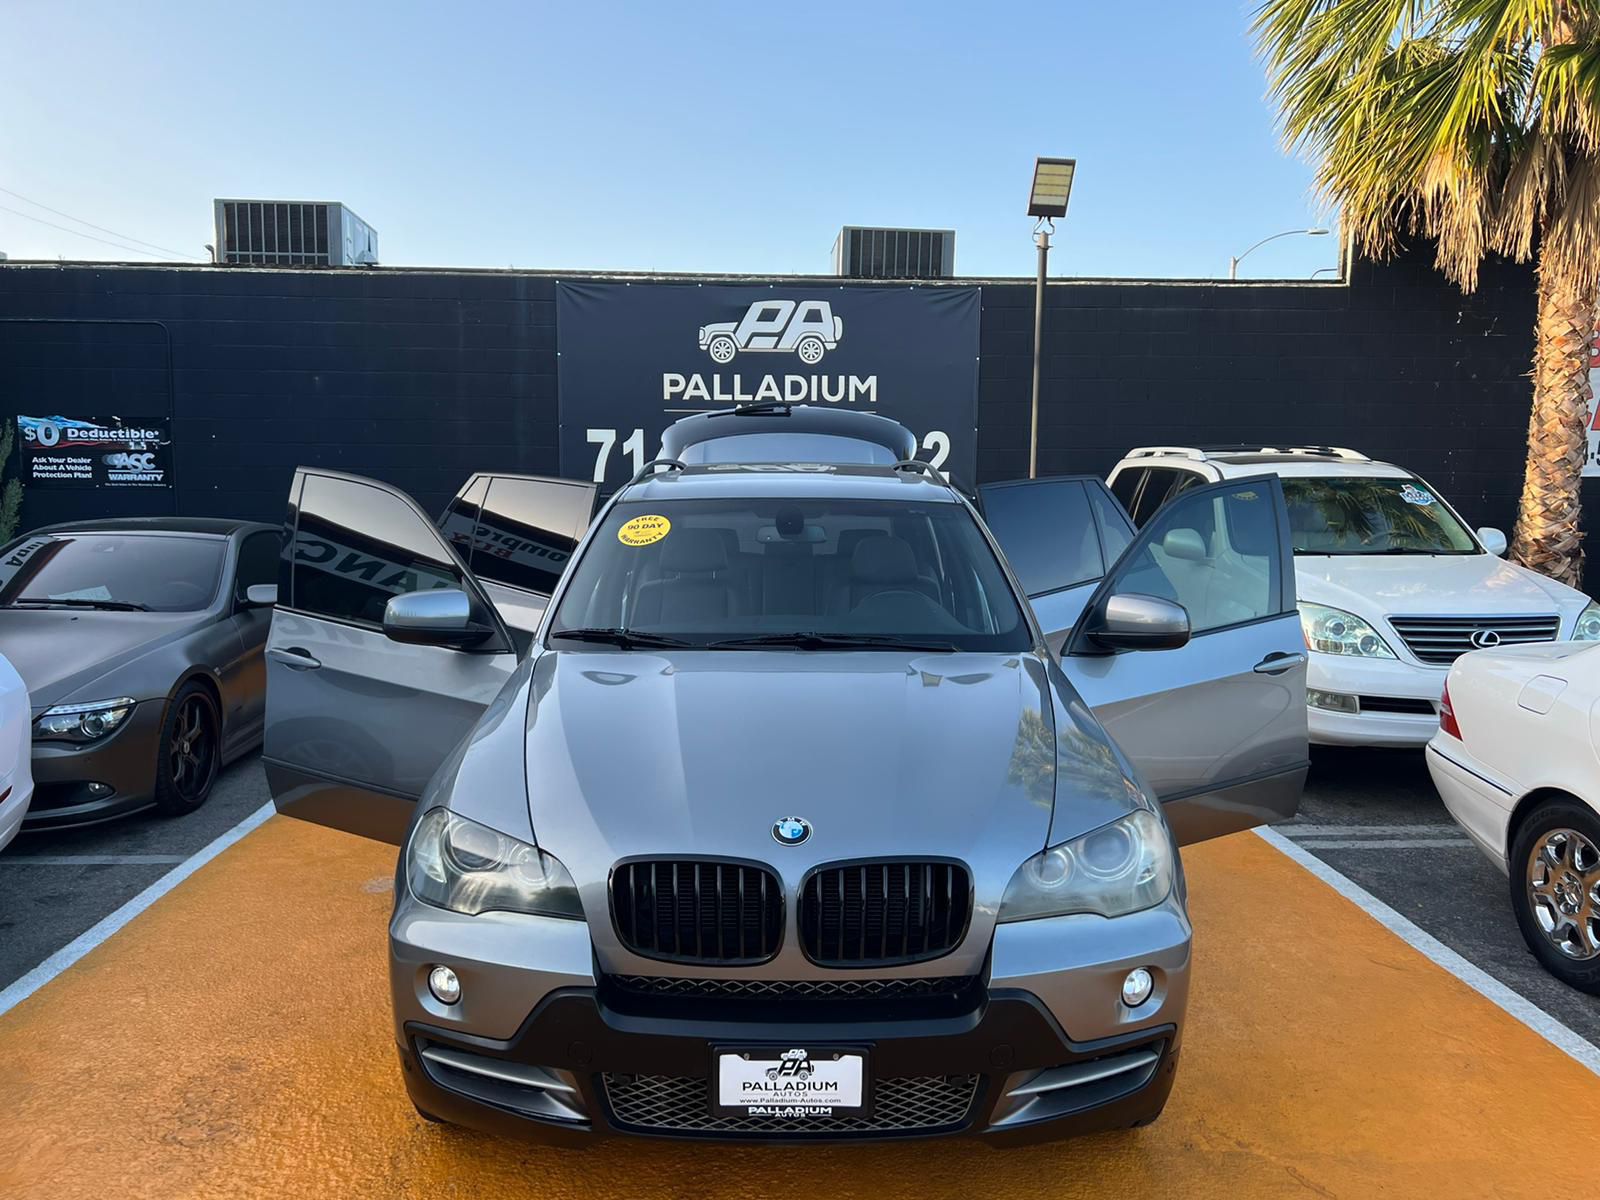 2008 BMW X5 4.8I ✅90 DAYS WARRANTY INCLUDED ✅ 🌟finance available🌟 🚗we take trades🚗